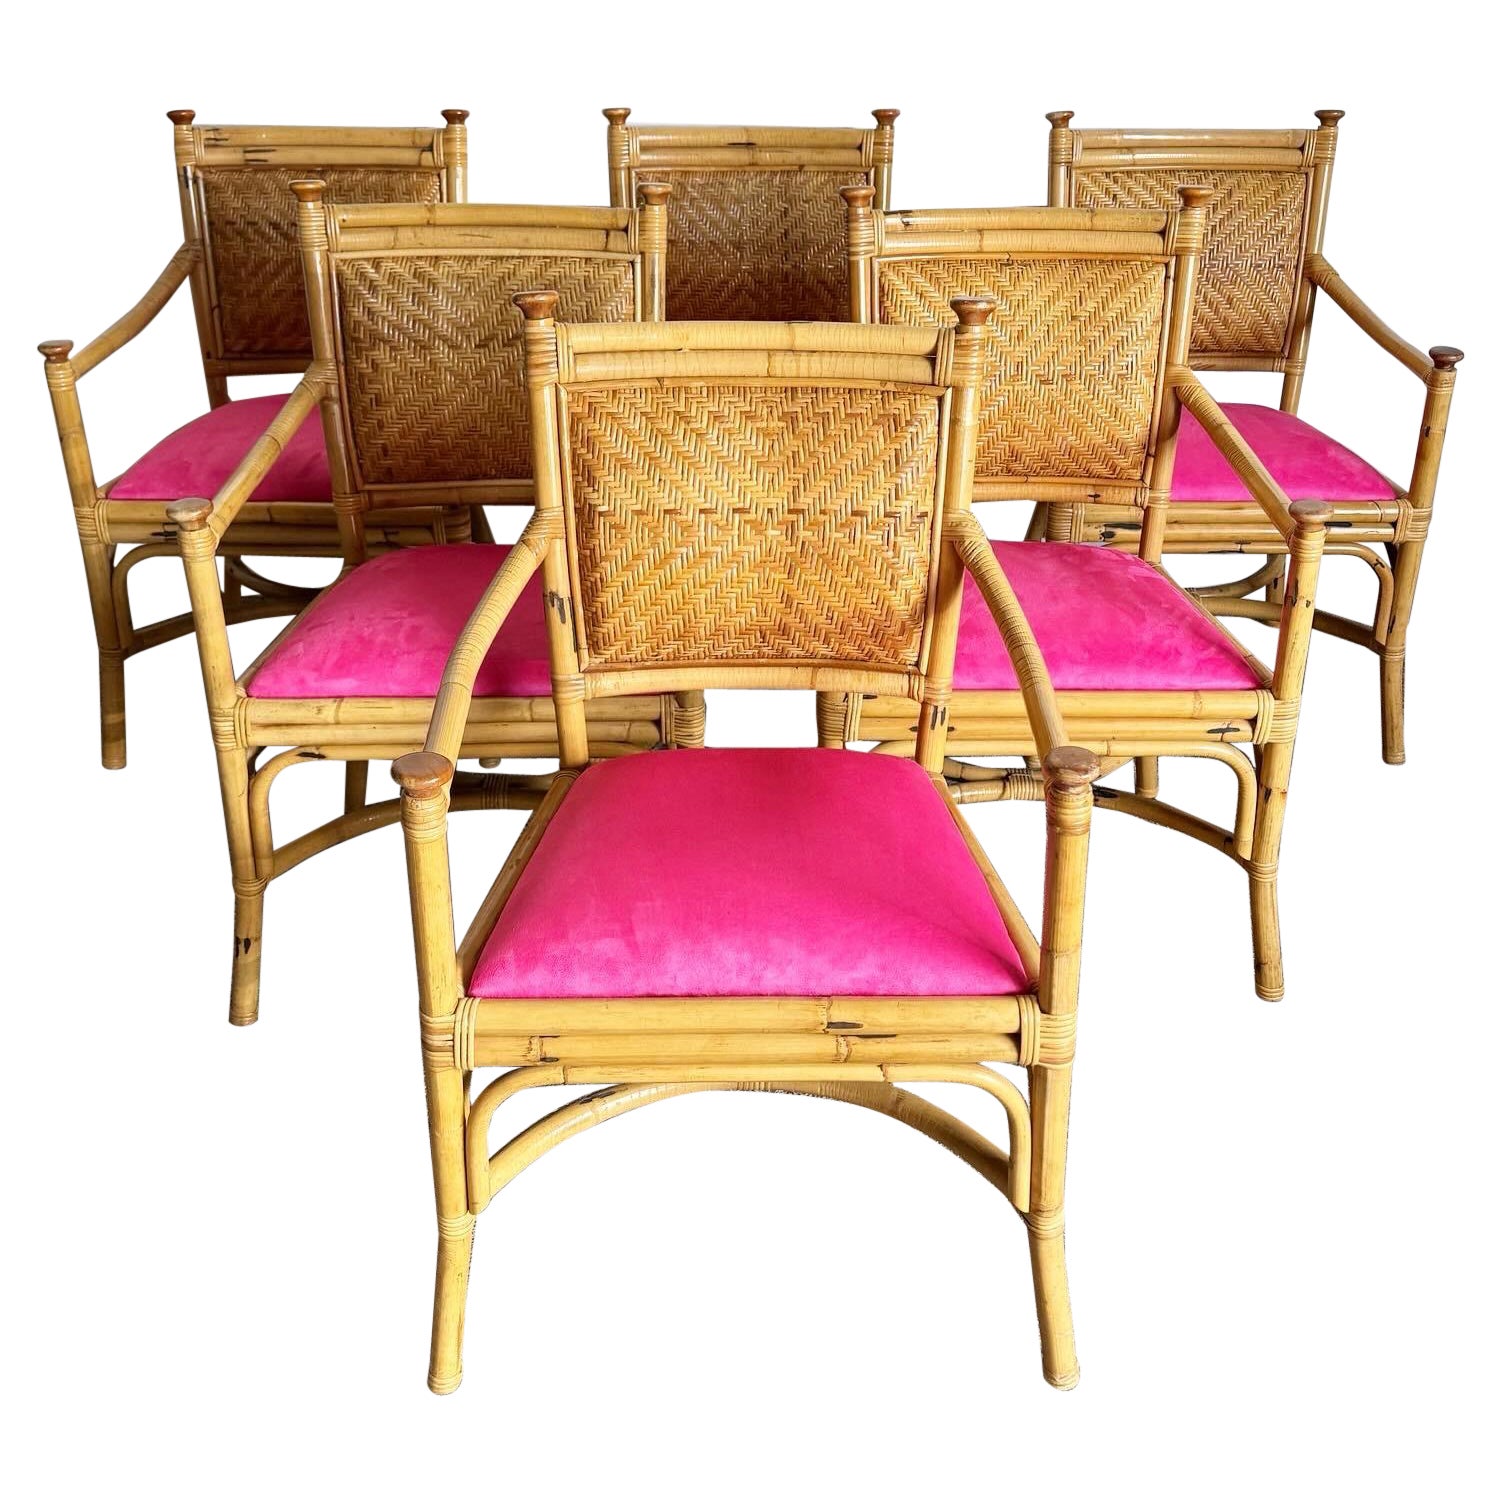 Boho Chic Wicker Rattan Bamboo Dining Arm Chairs With Hot Pink Cushions For Sale